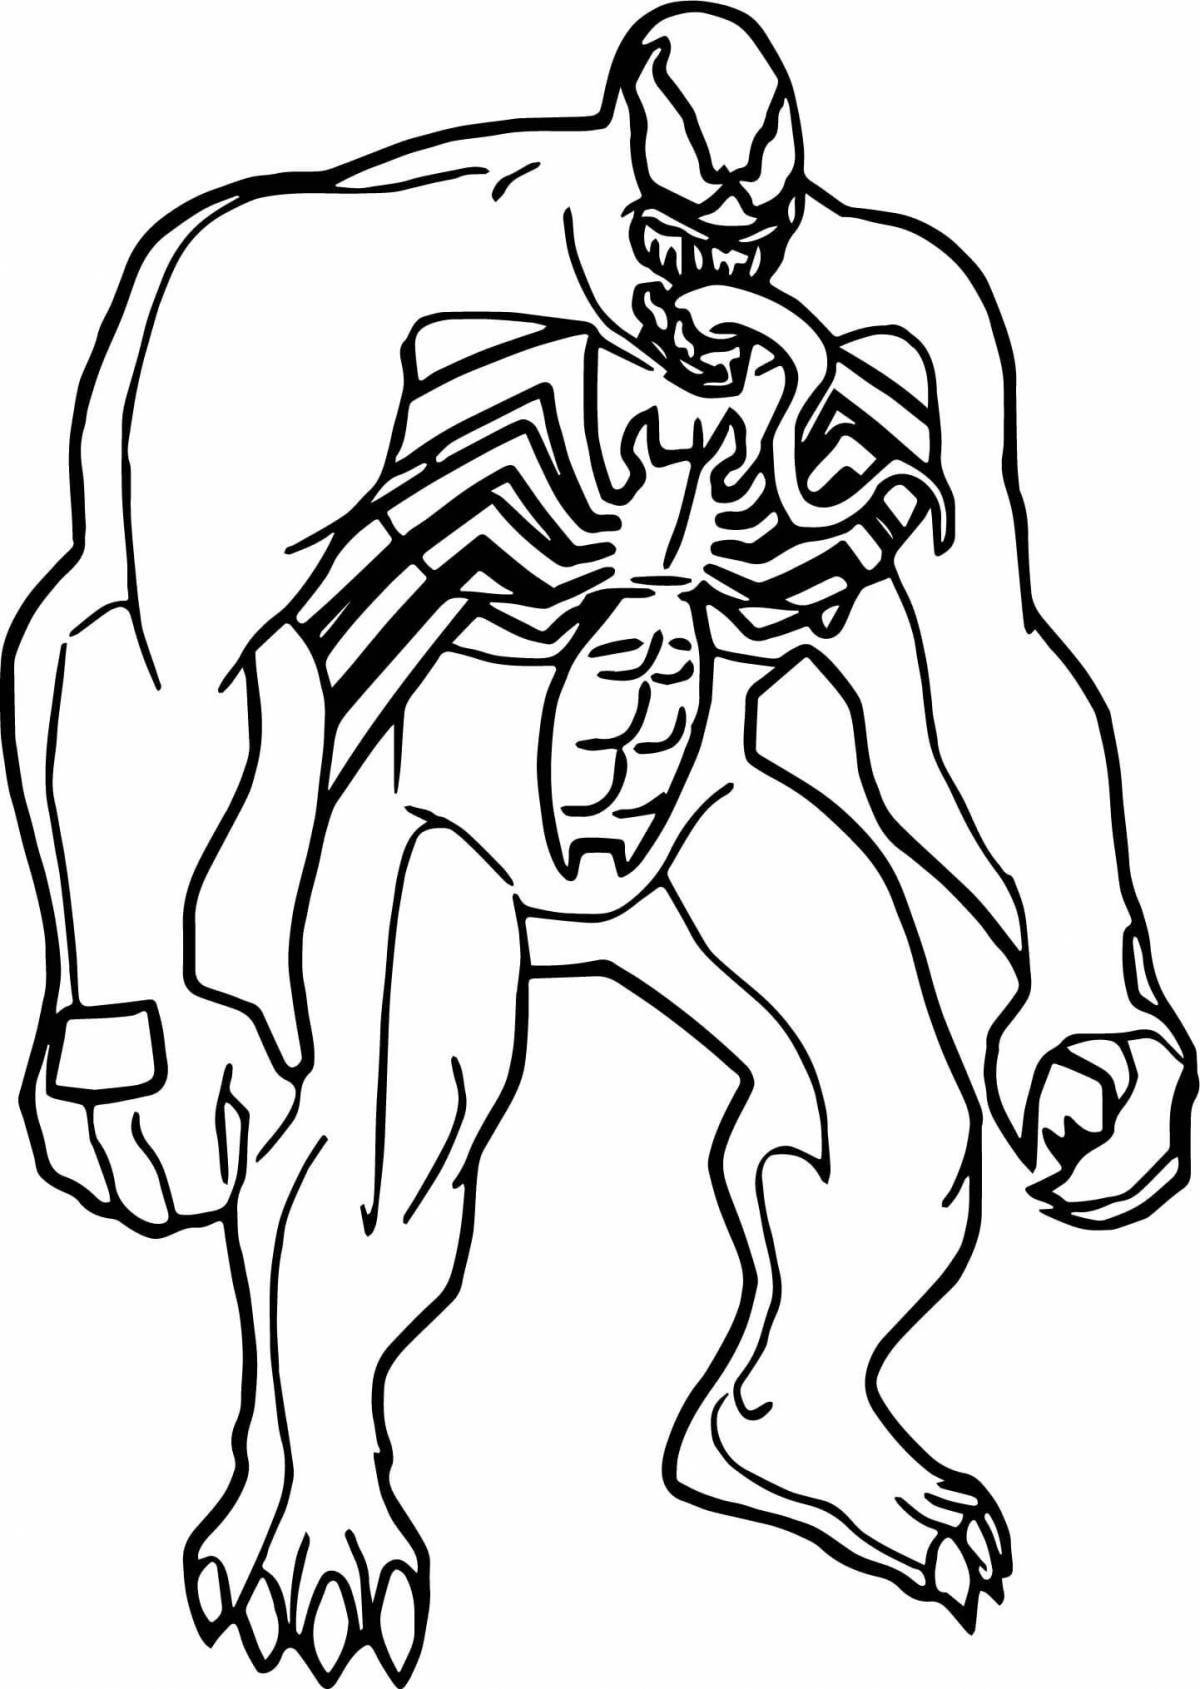 Poison shiny coloring page